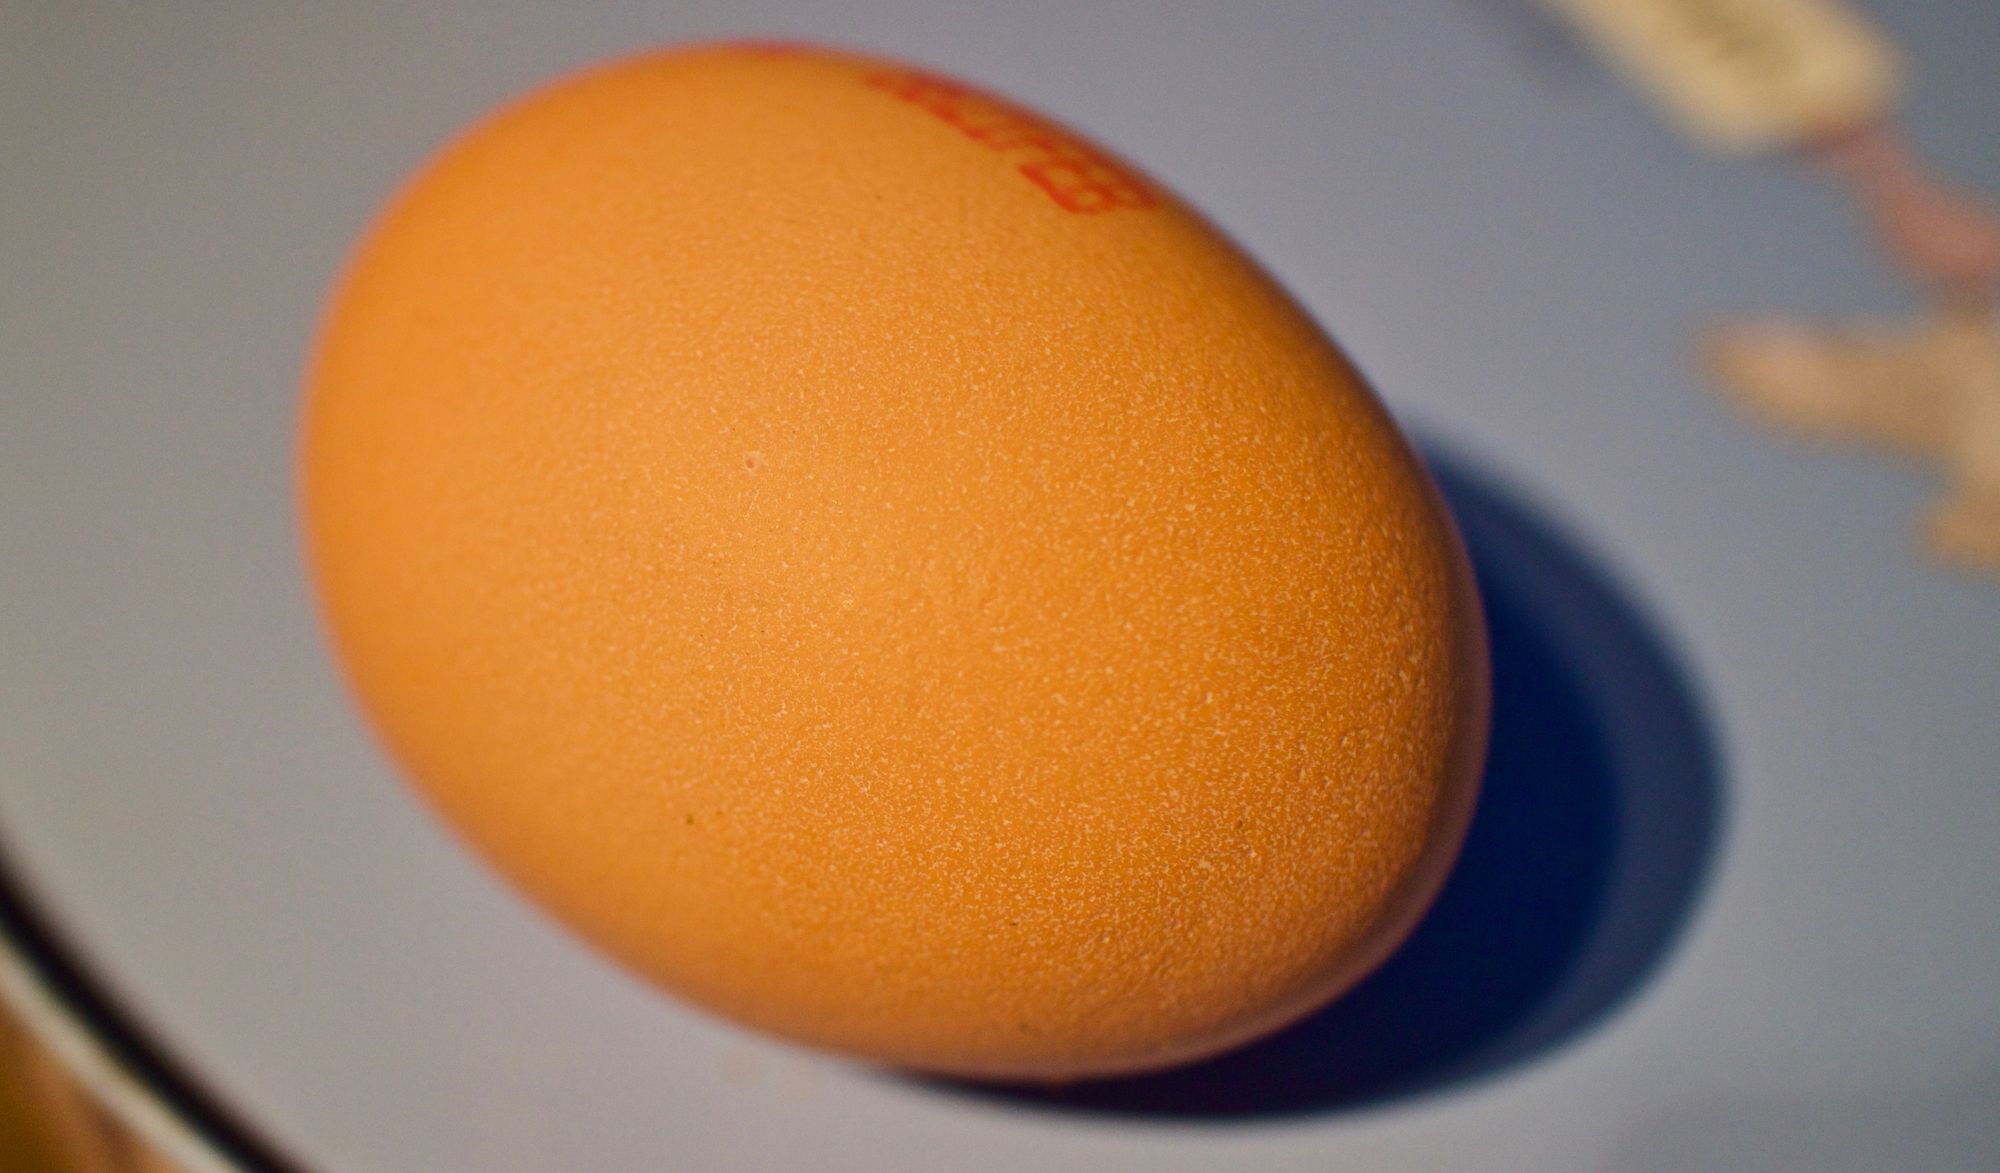 The World Record Egg: hacking attention for mental health?